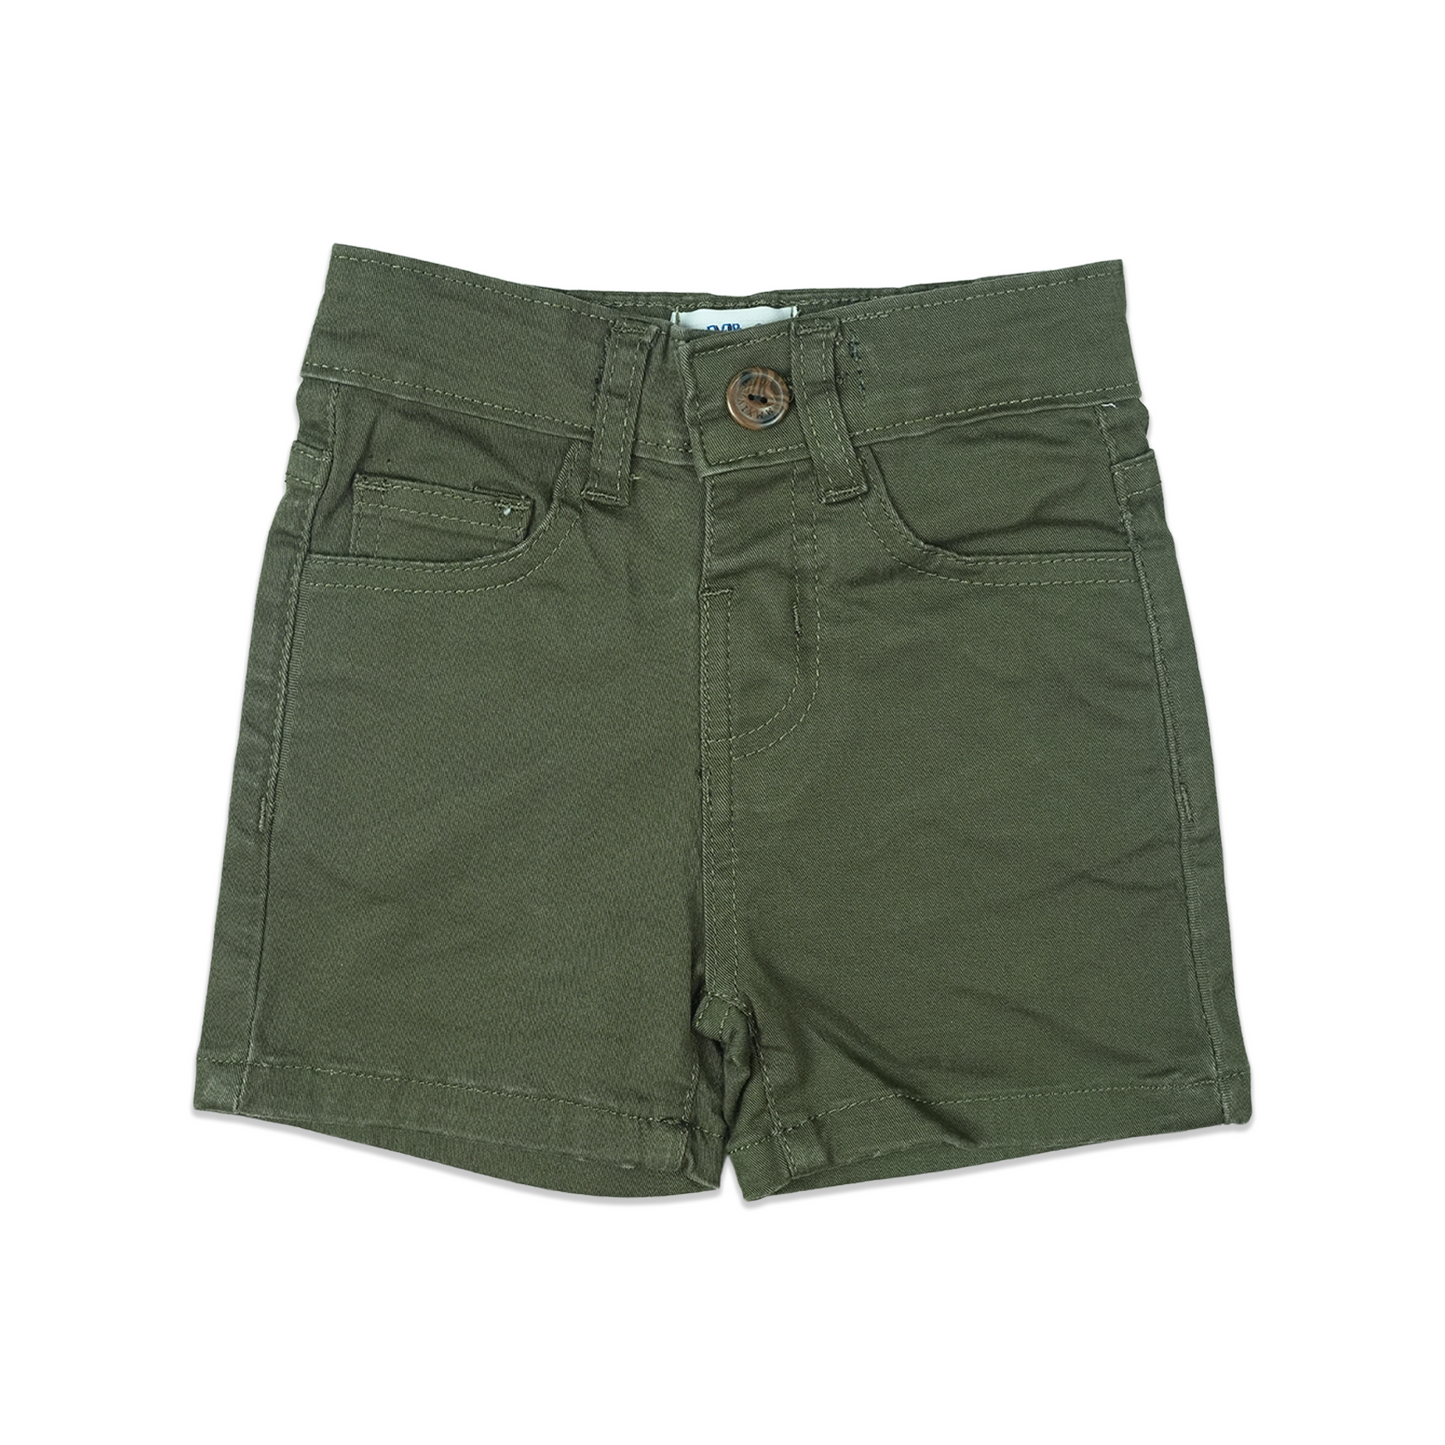 Green Colored Shorts for boys - Miniwears